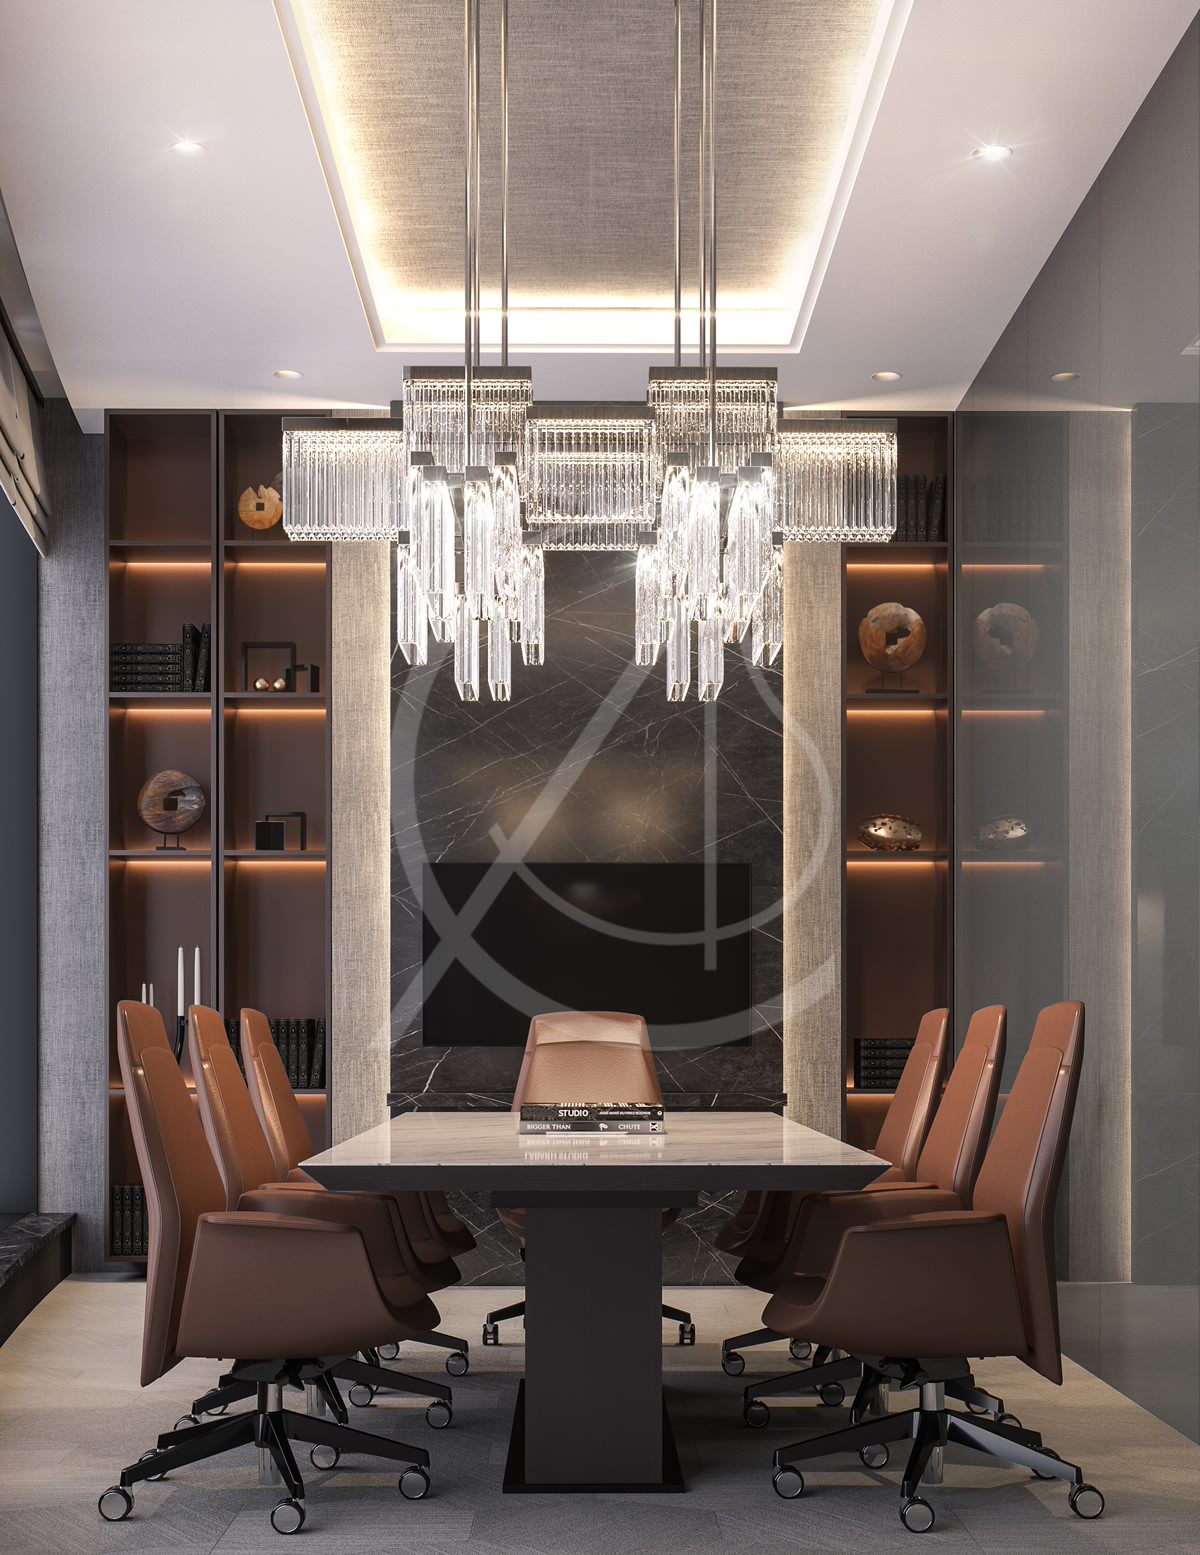 Modern Luxury Ceo Office Interior Design Comelite Architecture And Structure Img~6c2184b80a6860d6 16 7576 1 3e85880 